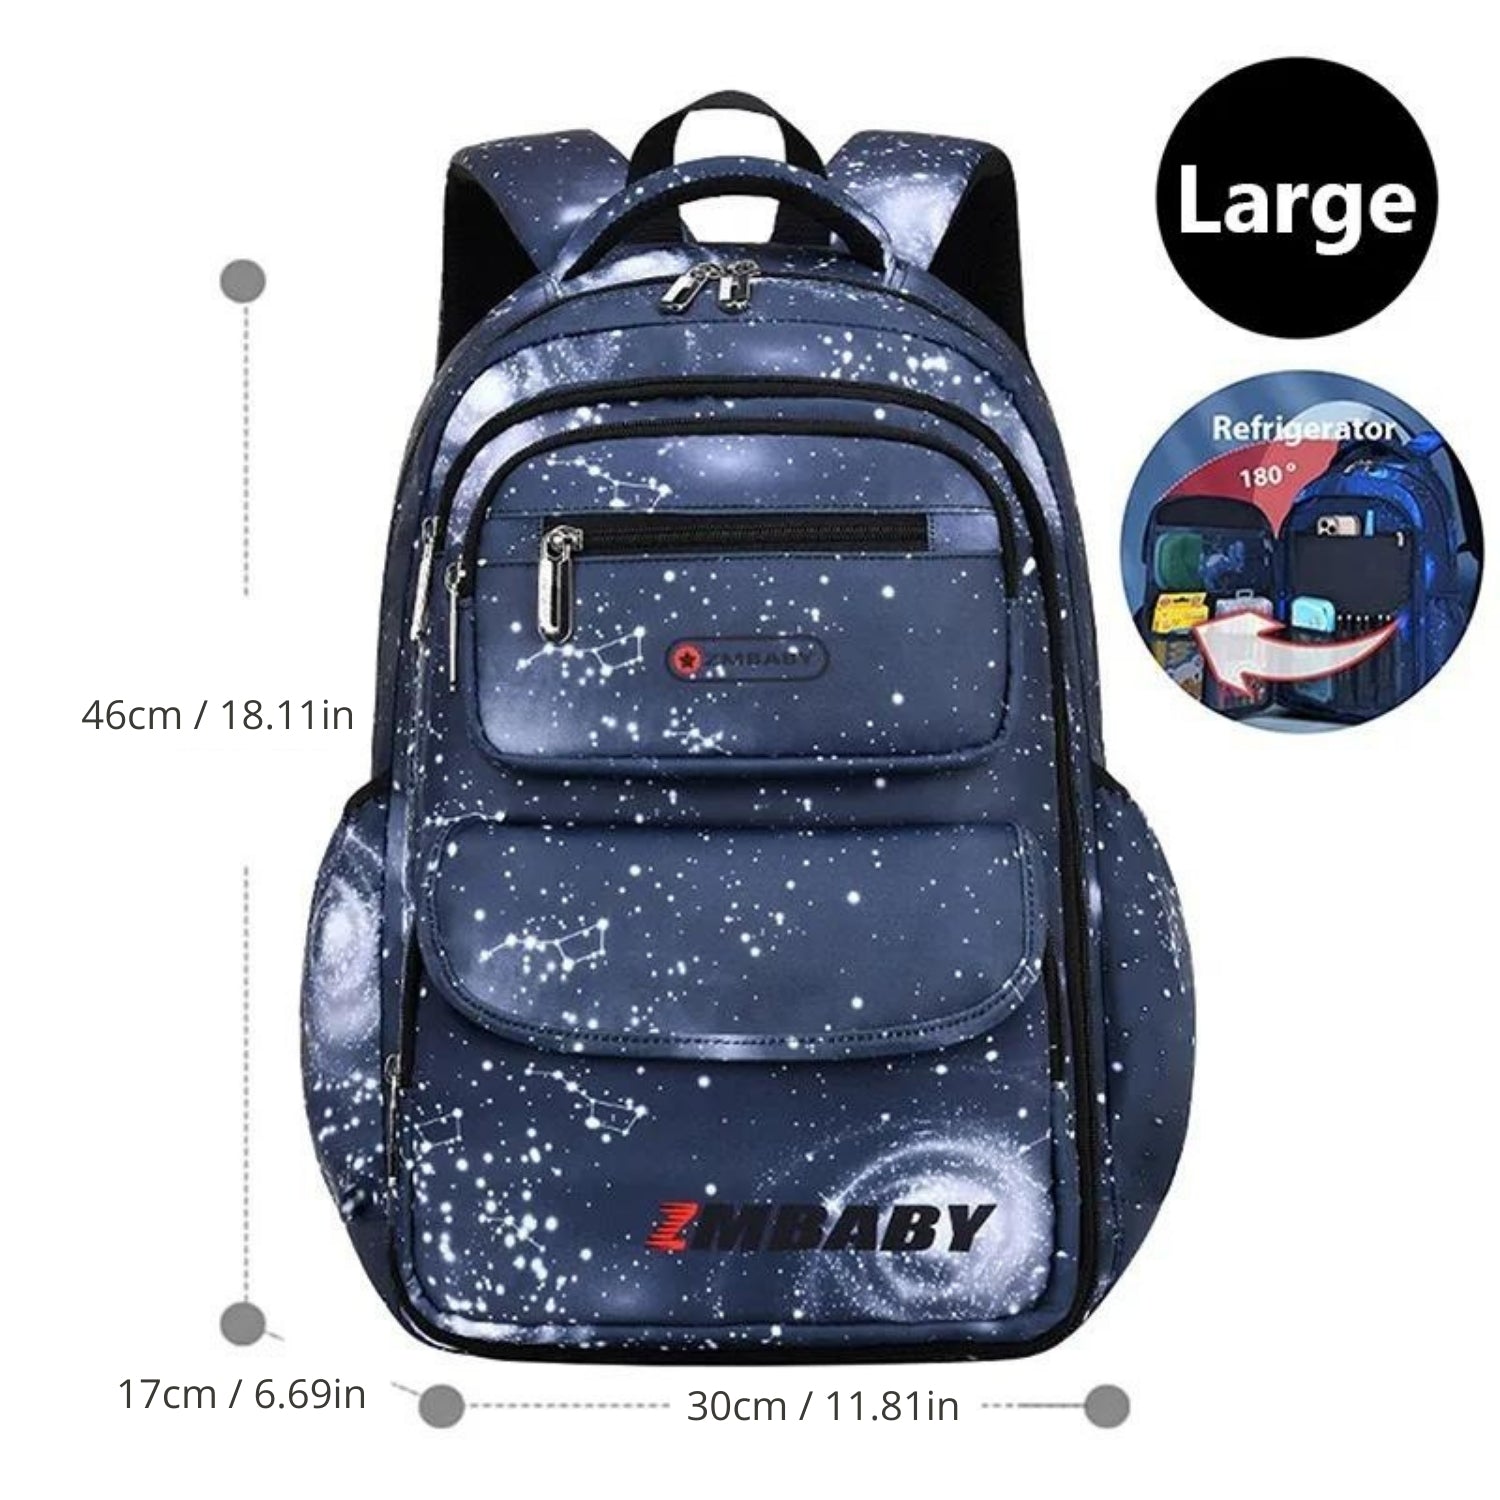 Space-Themed Organizational School Backpack